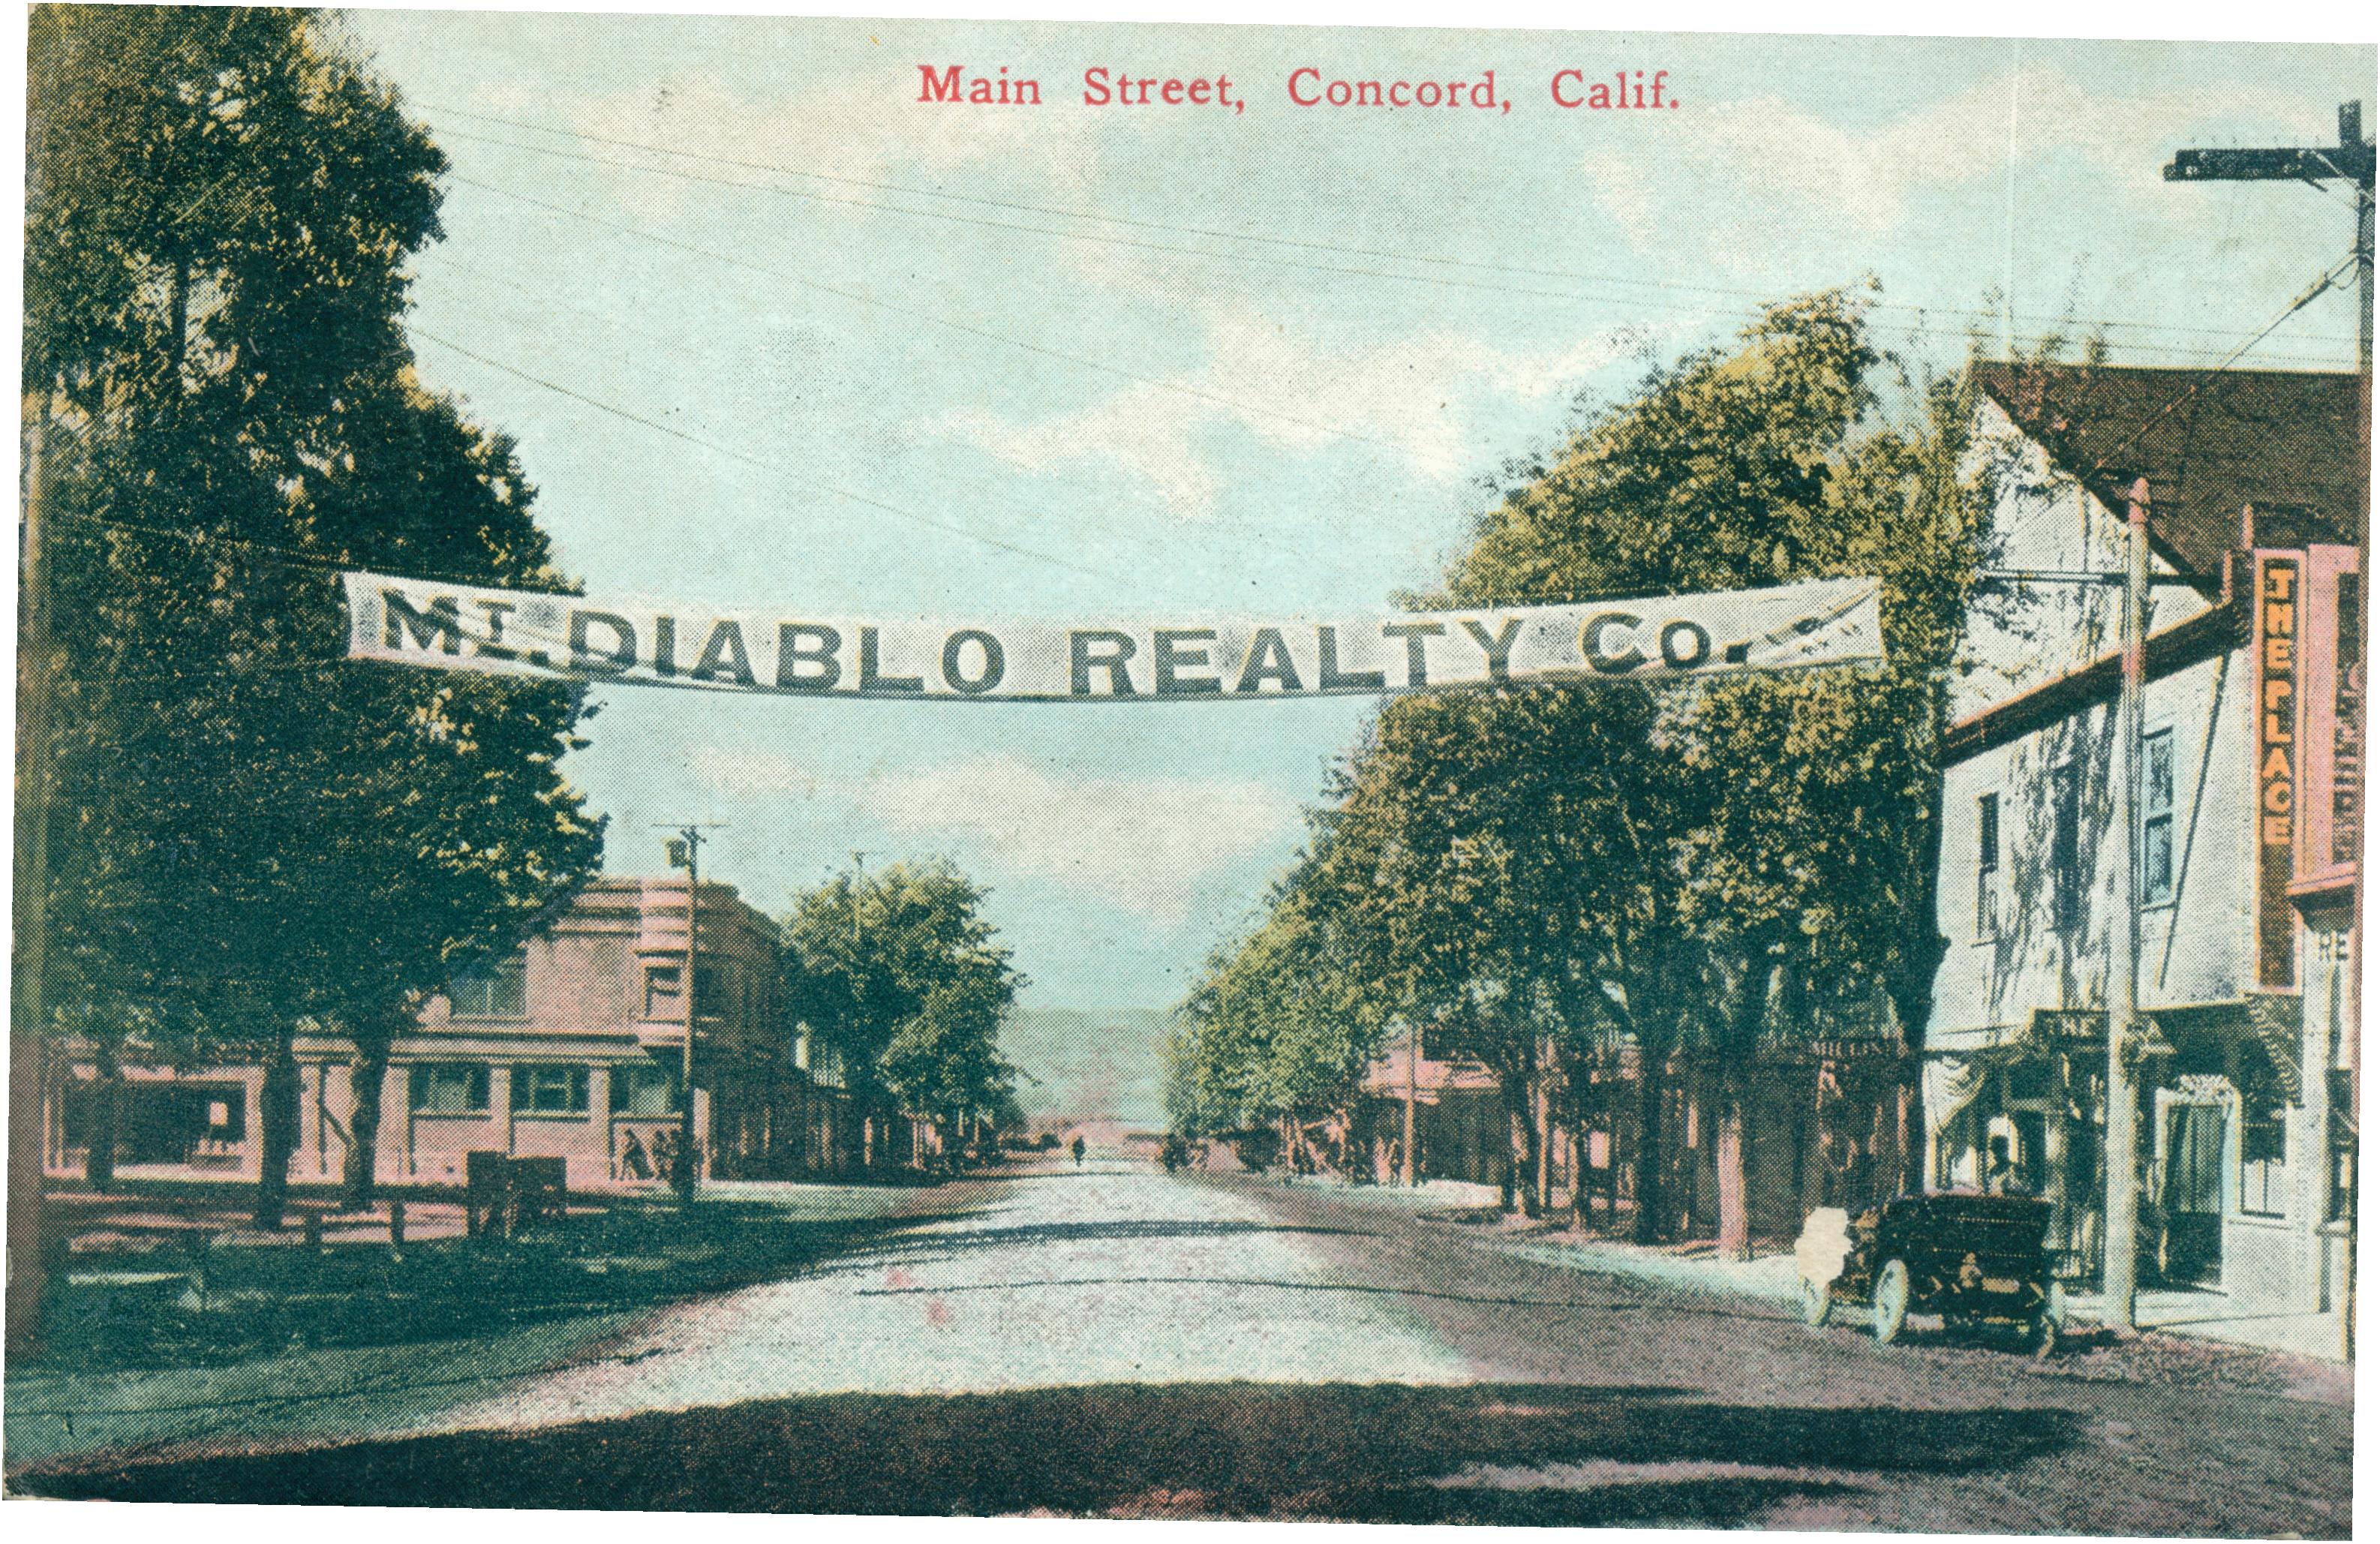 View of a street and several buildings with a banner for Mt. Diablo Realty suspended above the road